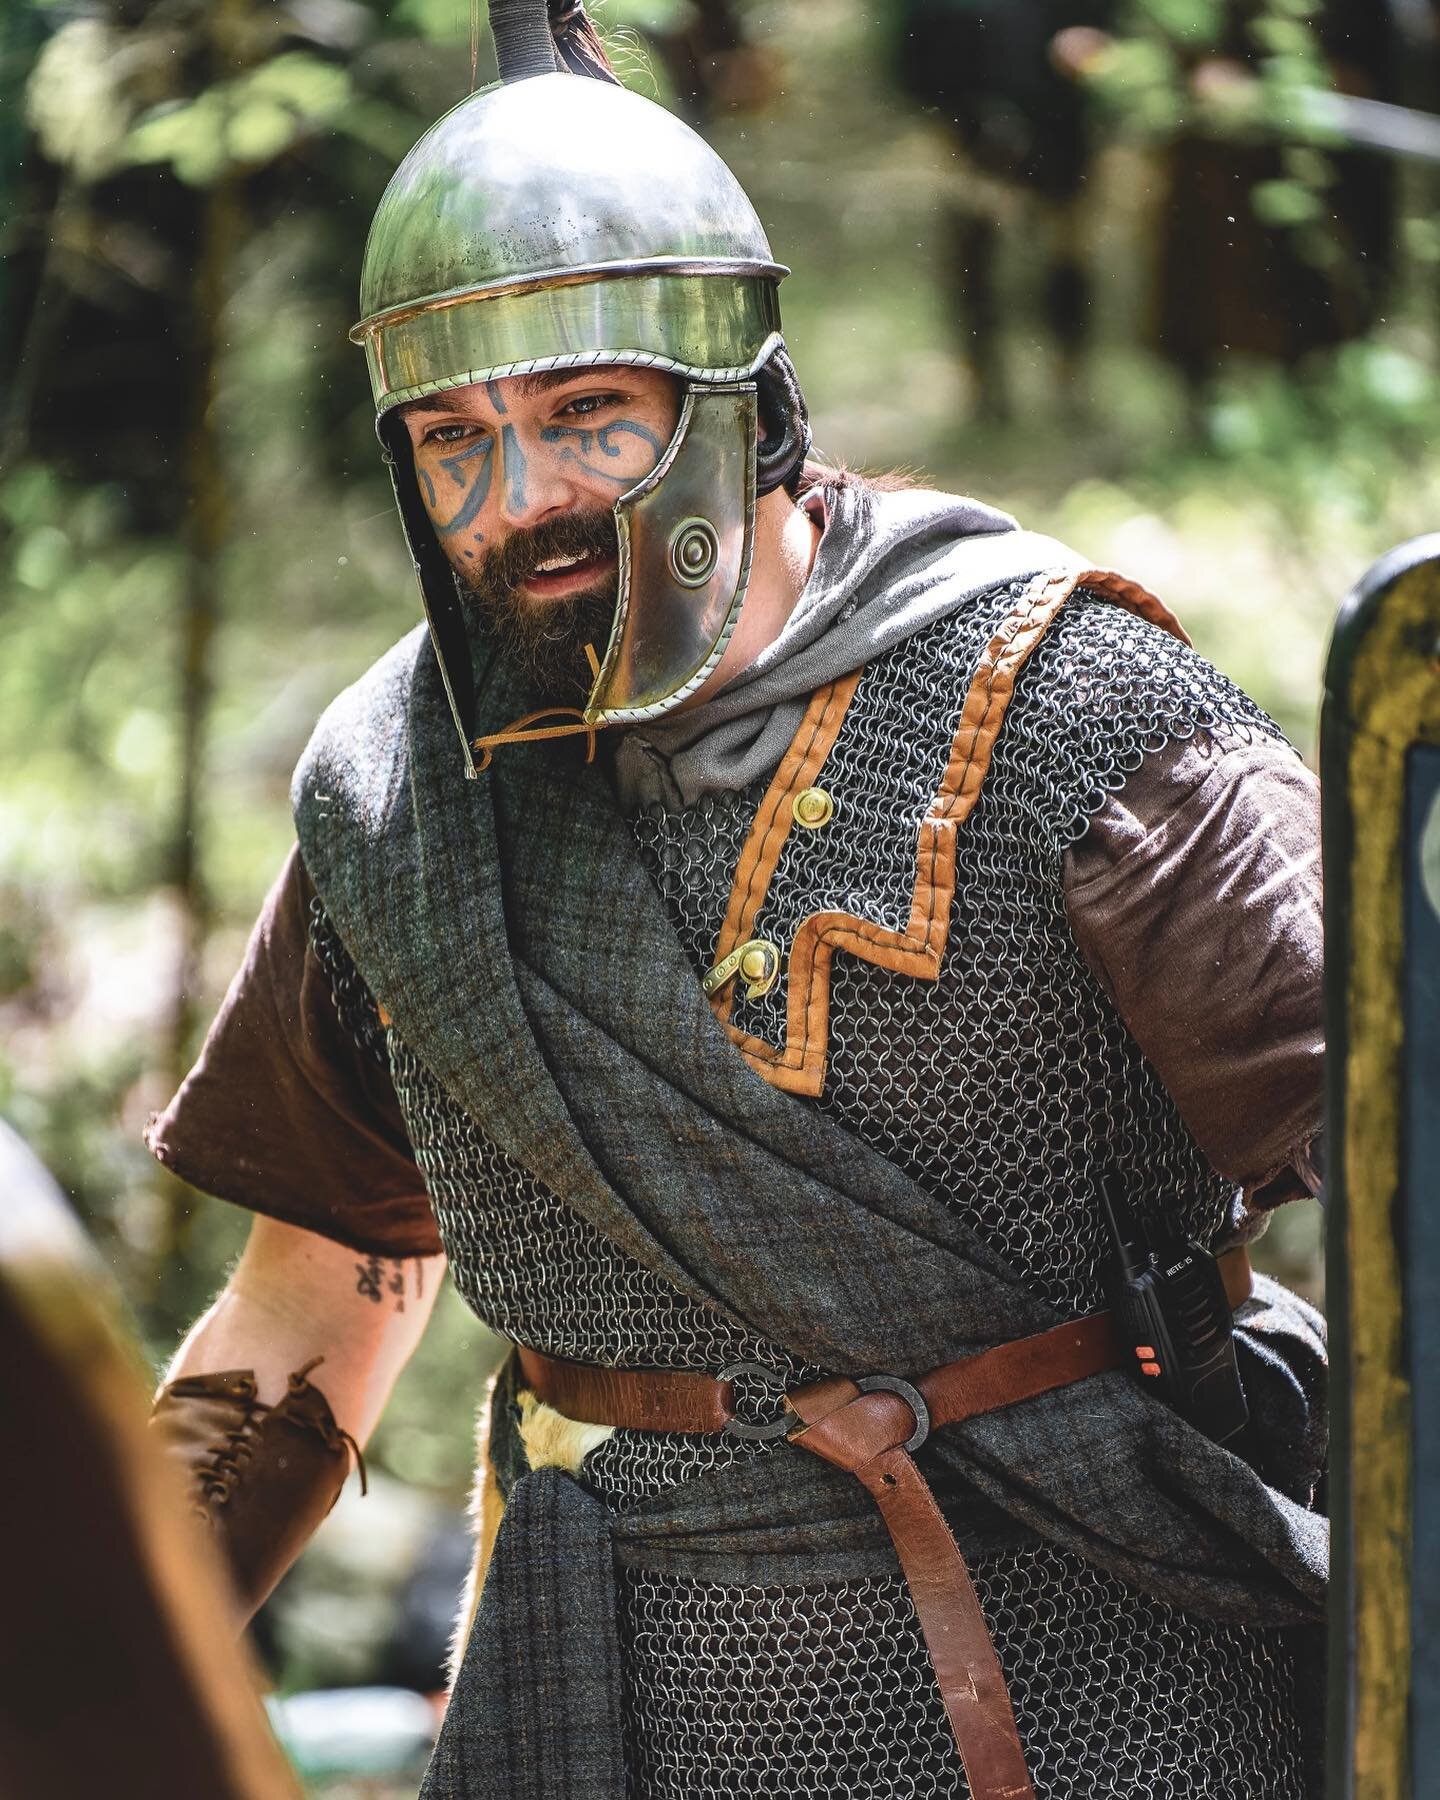 Did you get to meet the Wold Folk in battle or fight alongside us at Training Grounds? Interested in joining us at Weekend Warrior in October? Remember tickets go on sale May 1st for returning players and June 1st for new players!!
&mdash;
#medieval 